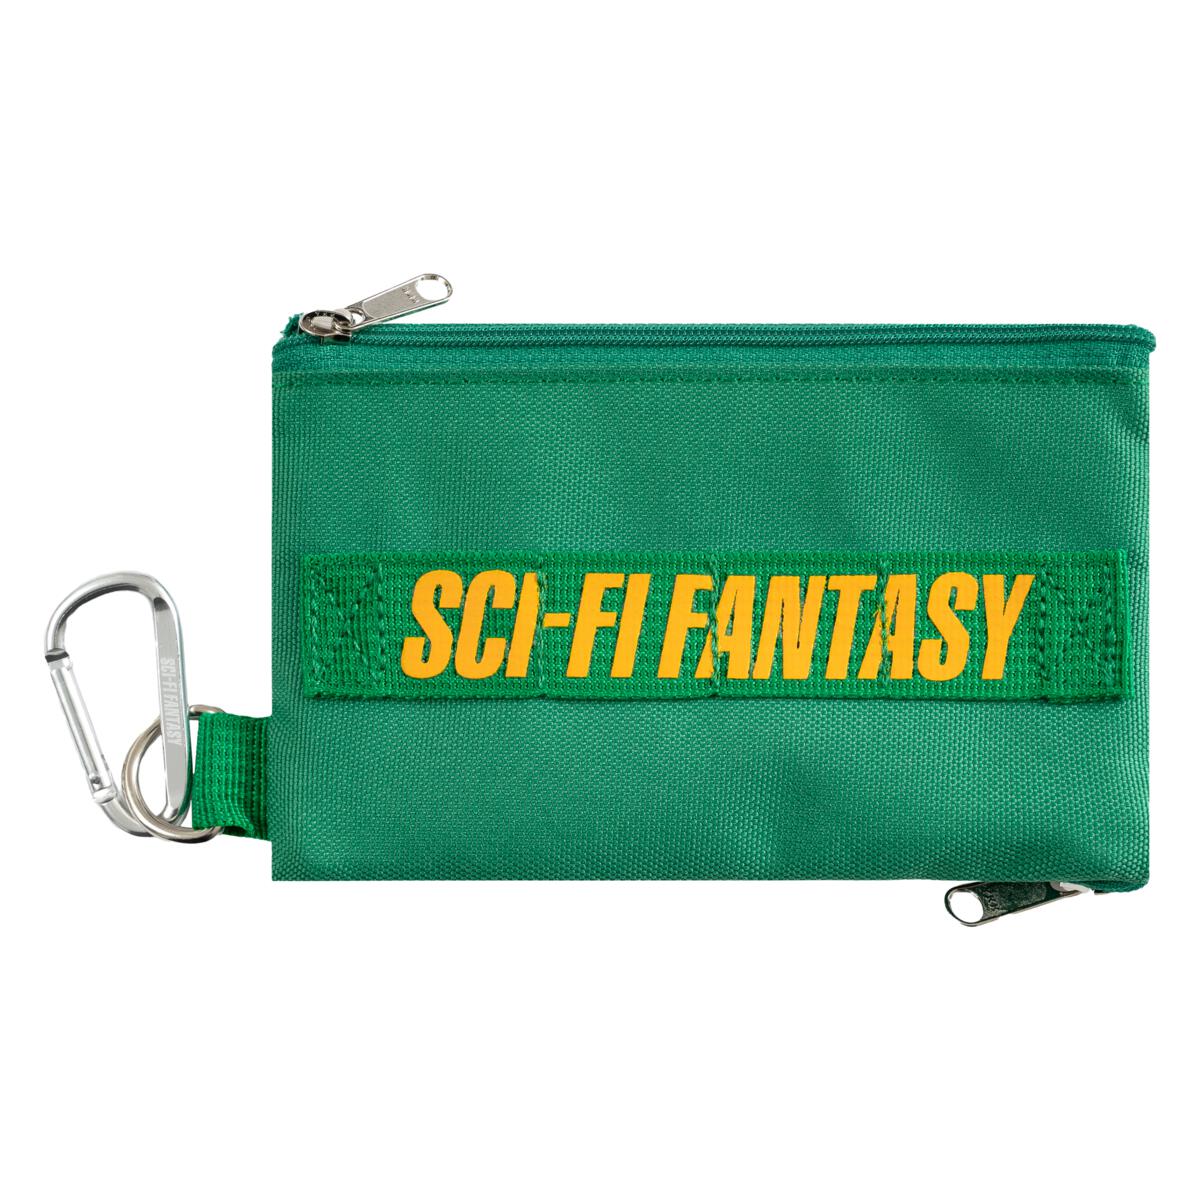 SCI-FI FANTASY CARRY-ALL POUCH COLOR VARIANT